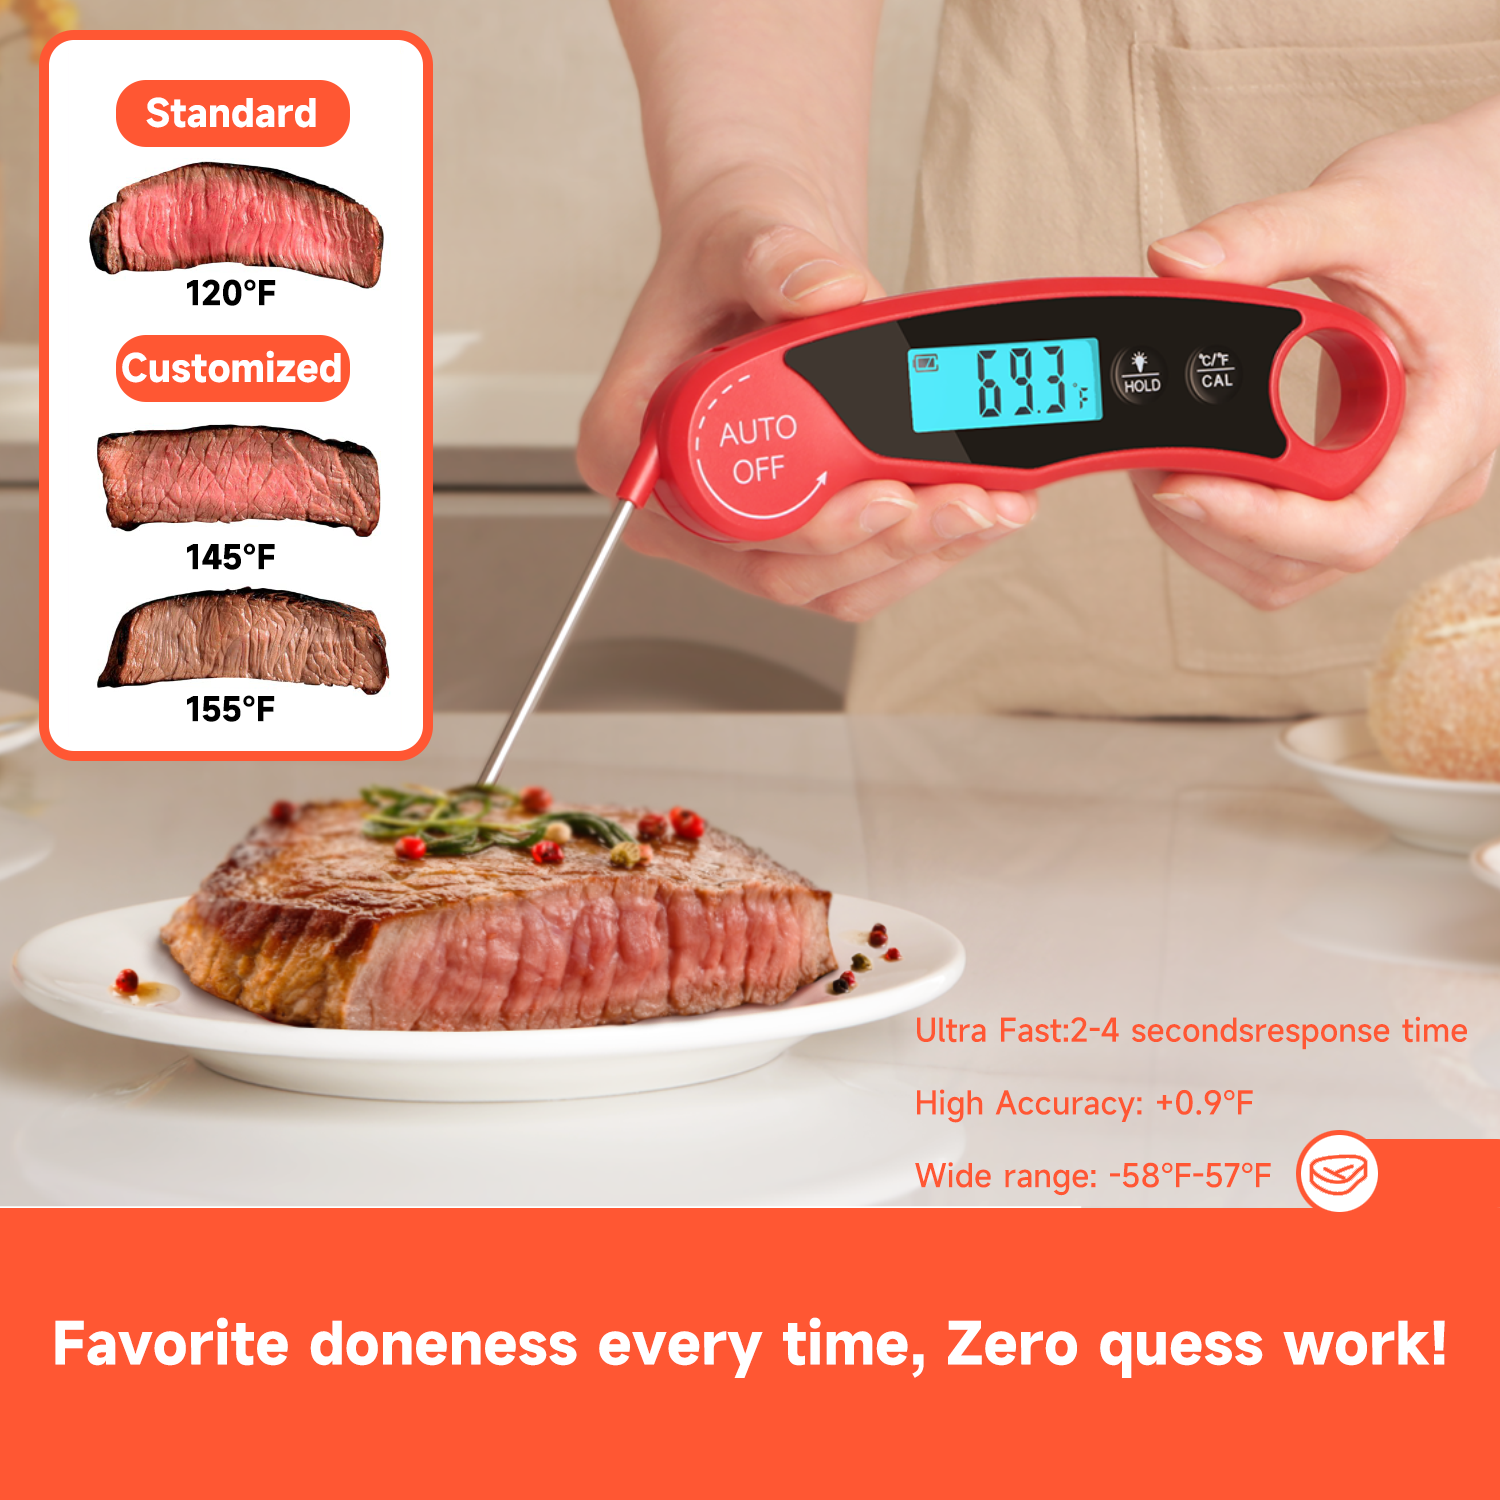 Waterproof Digital Instant Read Meat Thermometer for Cooking Food